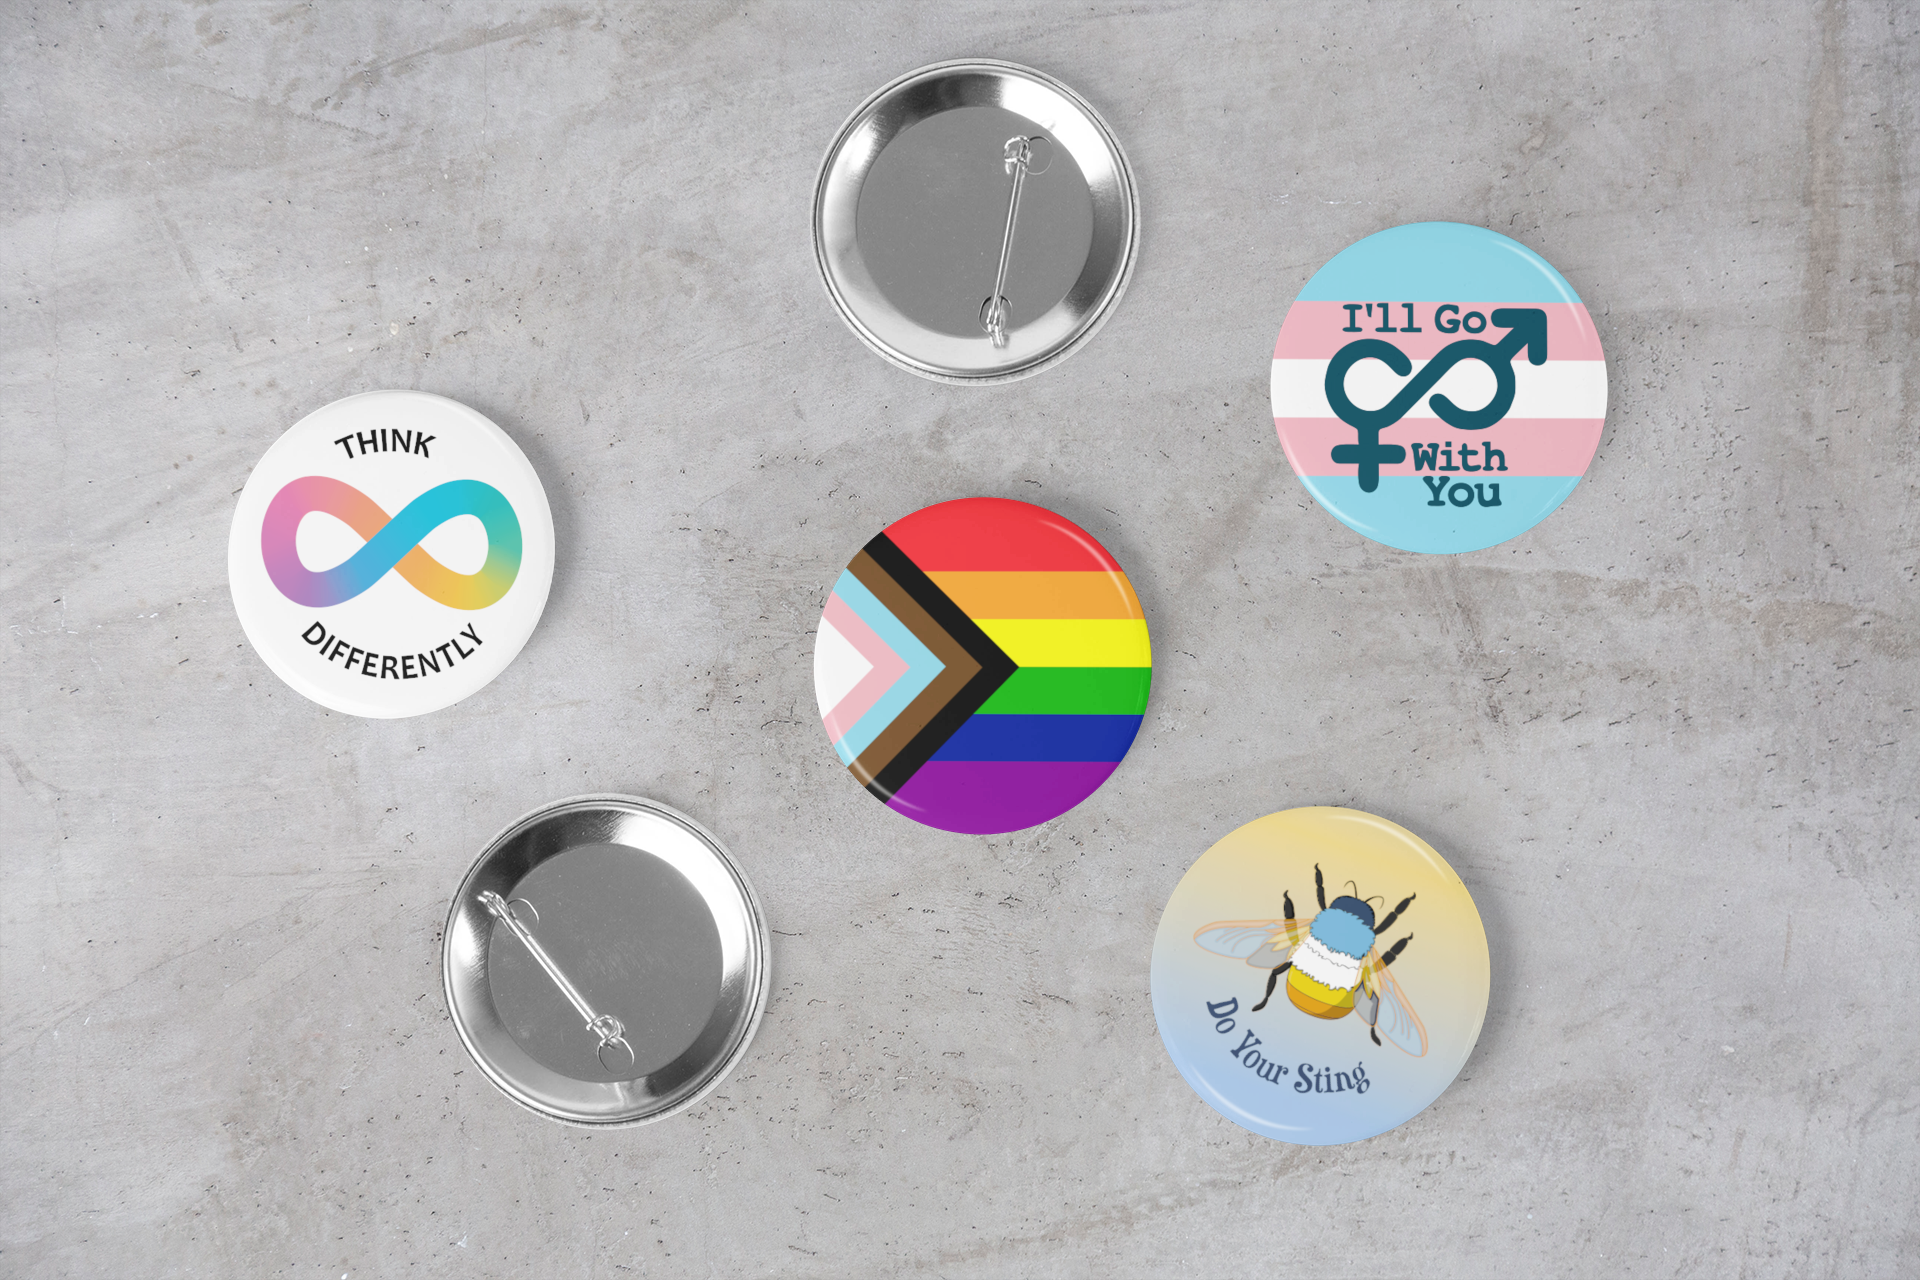 6 round pin-back buttons on a grey marble surface. Two are upside down, showing the pins. 1: Neurodiversity "think differently" 2: Raanbow progress 3: Transgender "I'll go with you" 4: Aroace V1 Bumblebee "Do your sting"